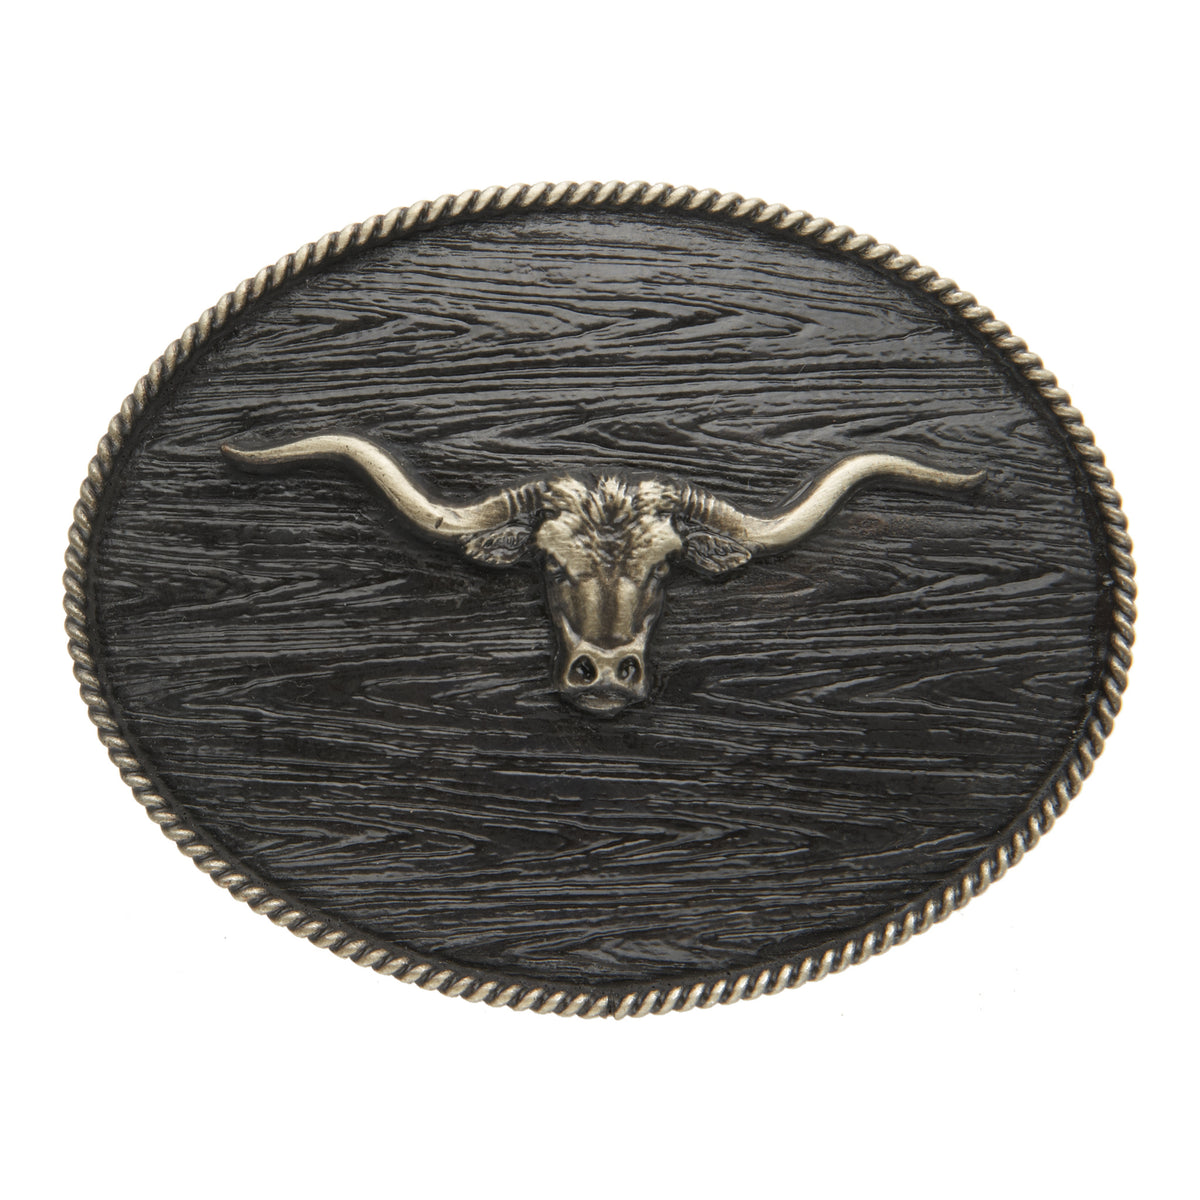 Longhorn with Wood Grain Iconic Classic Buckle